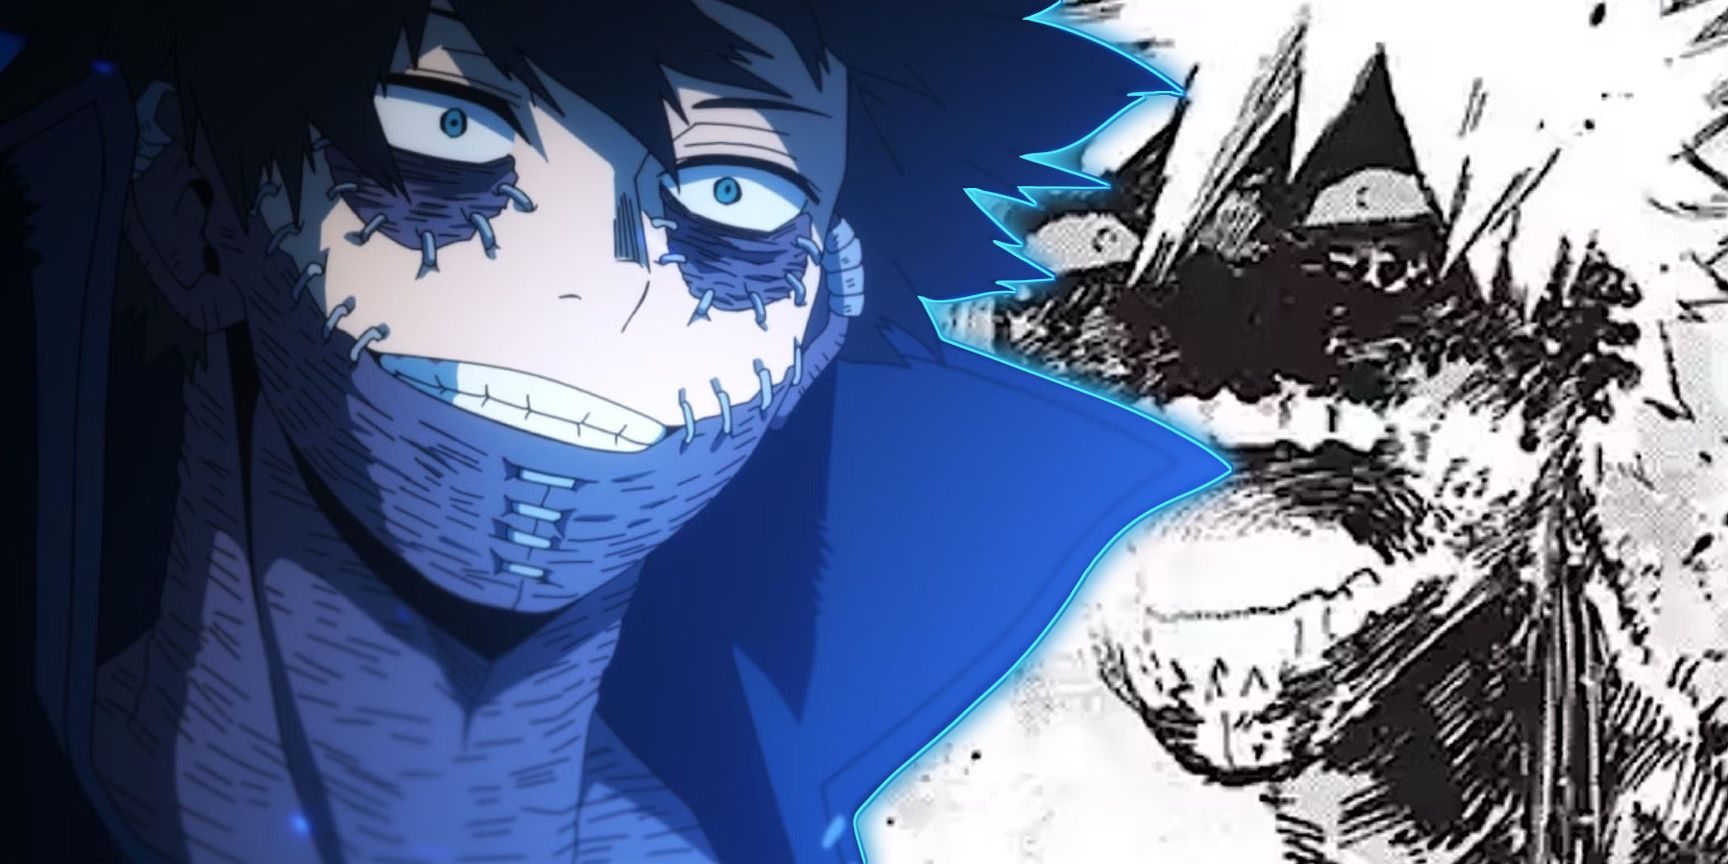 What is Dabi's real name because I want to know? - Quora